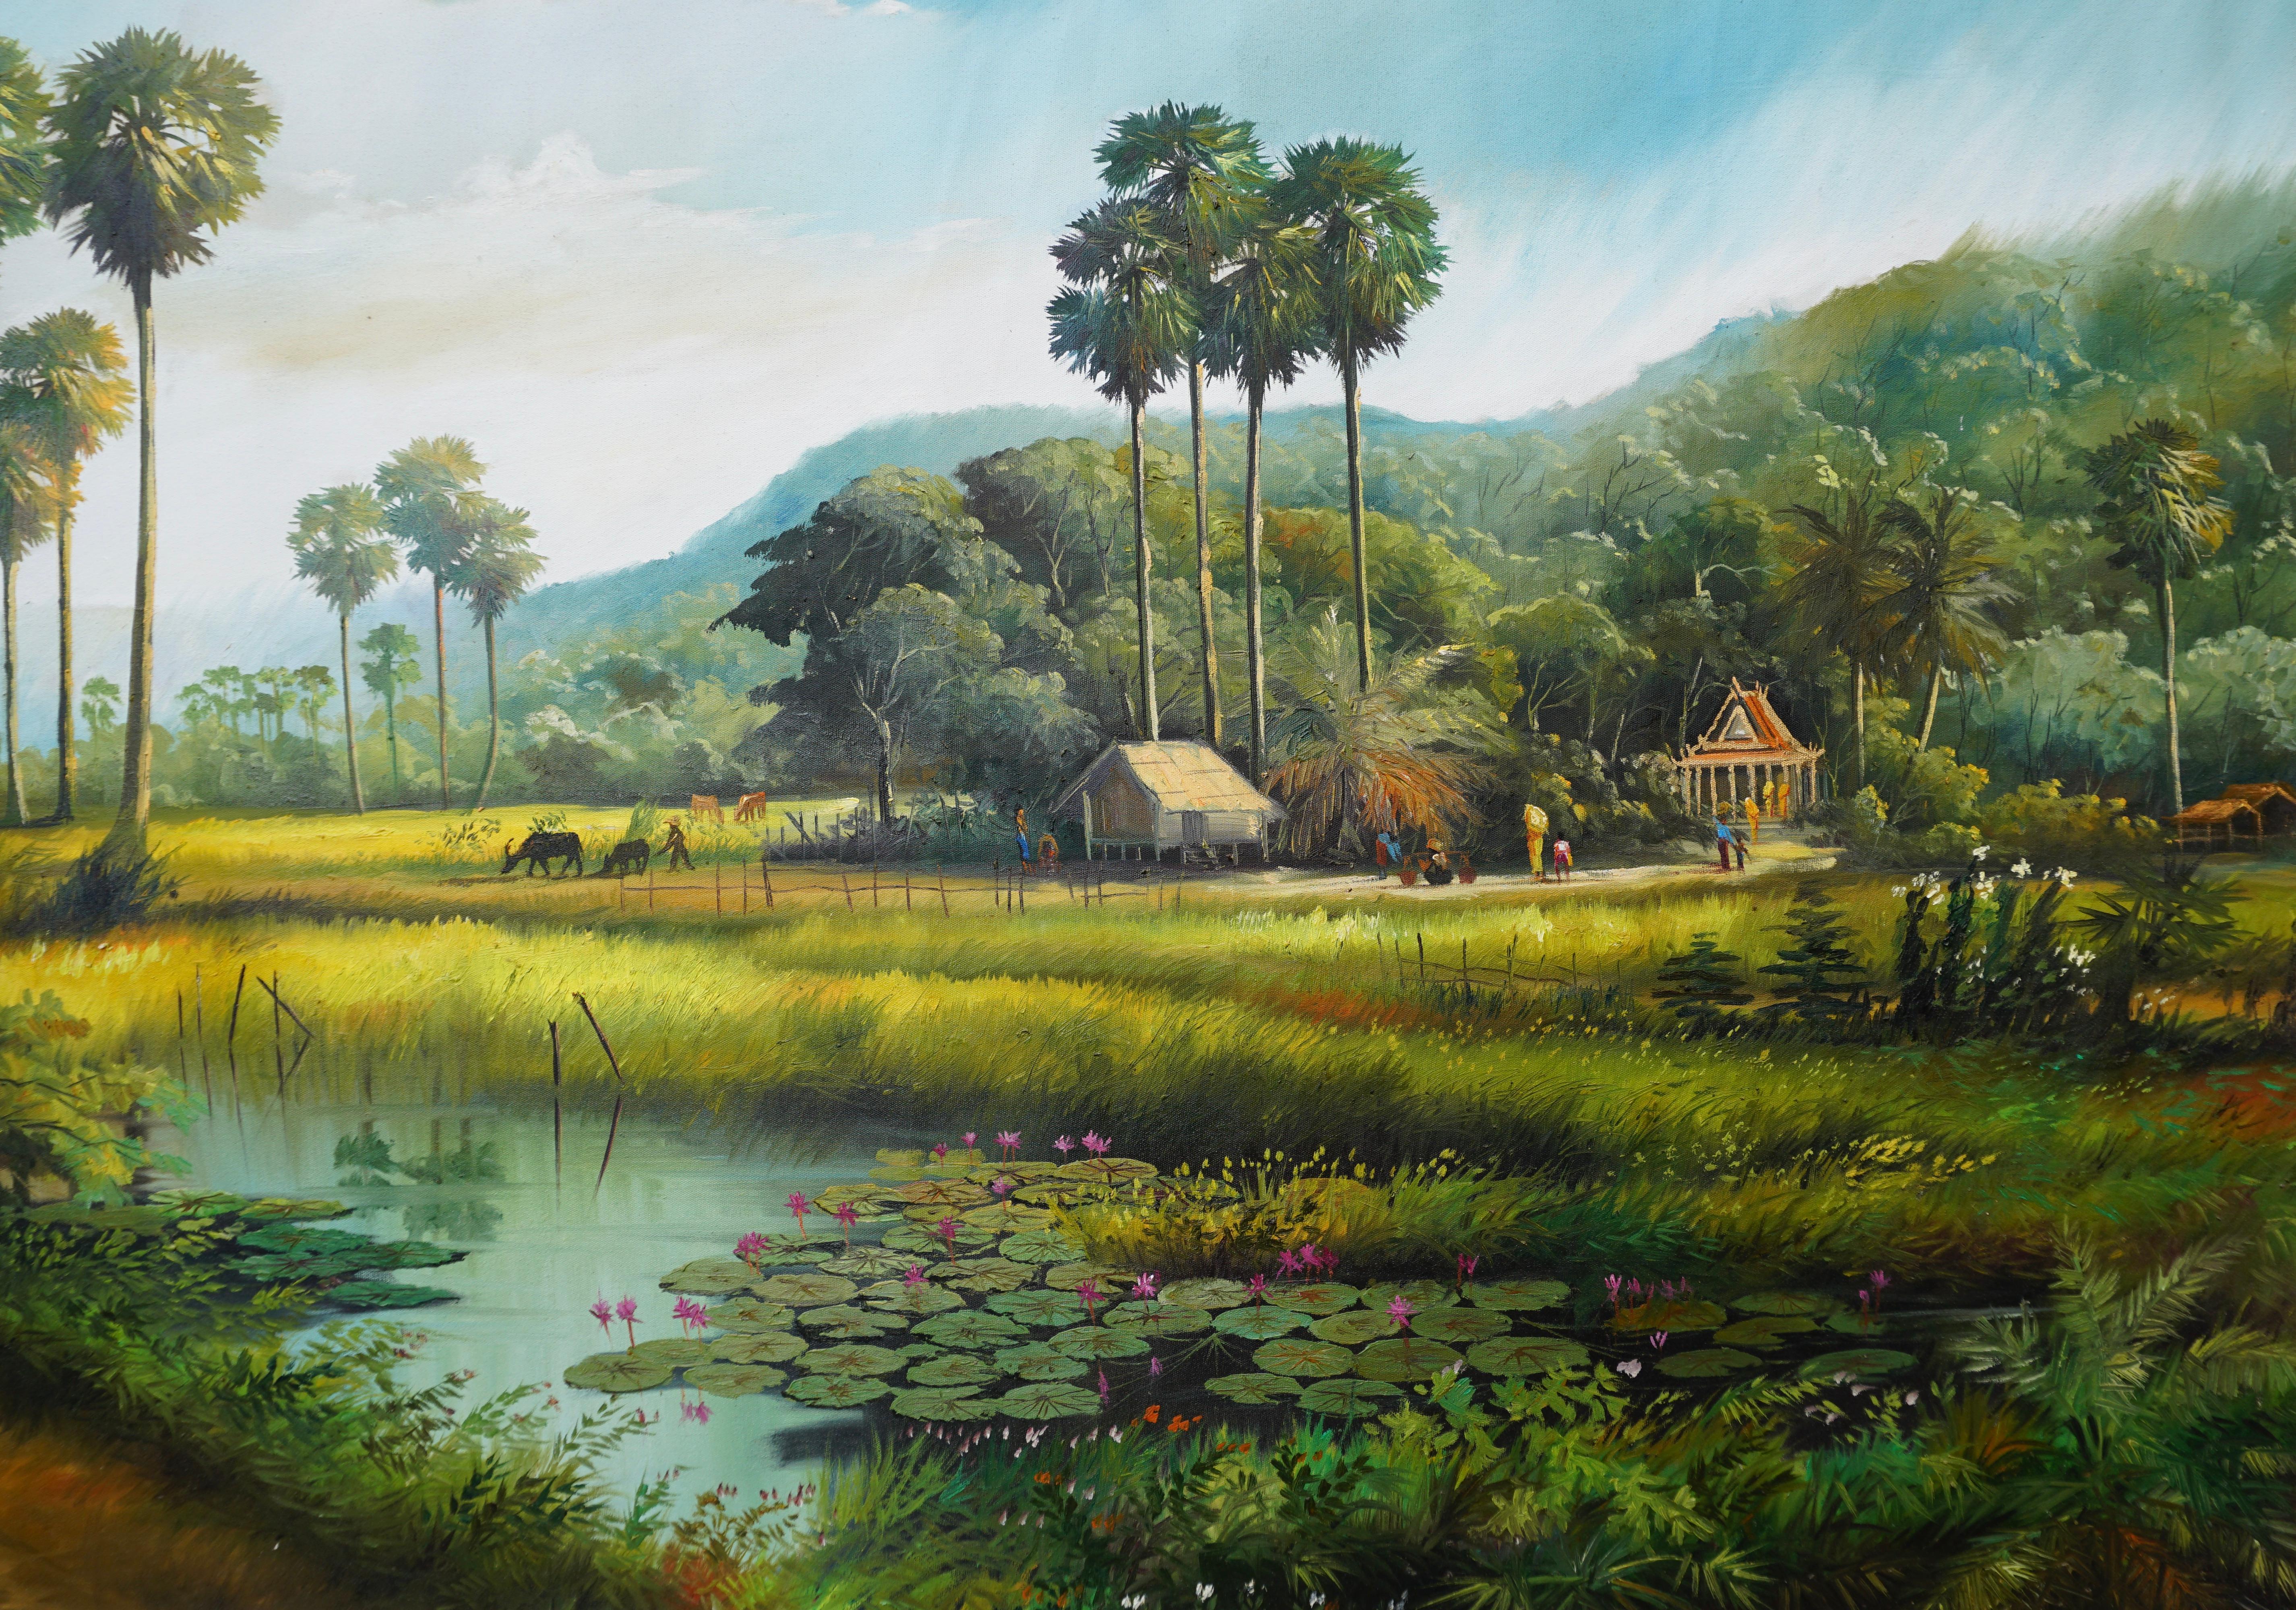 Set deep in the heart of the Asian countryside, this scene is reminiscent of the long-standing Oriental villages that existed in synchronicity with nature. The brilliant shades of brown and green evoke feelings of being at one with the Earth. Place